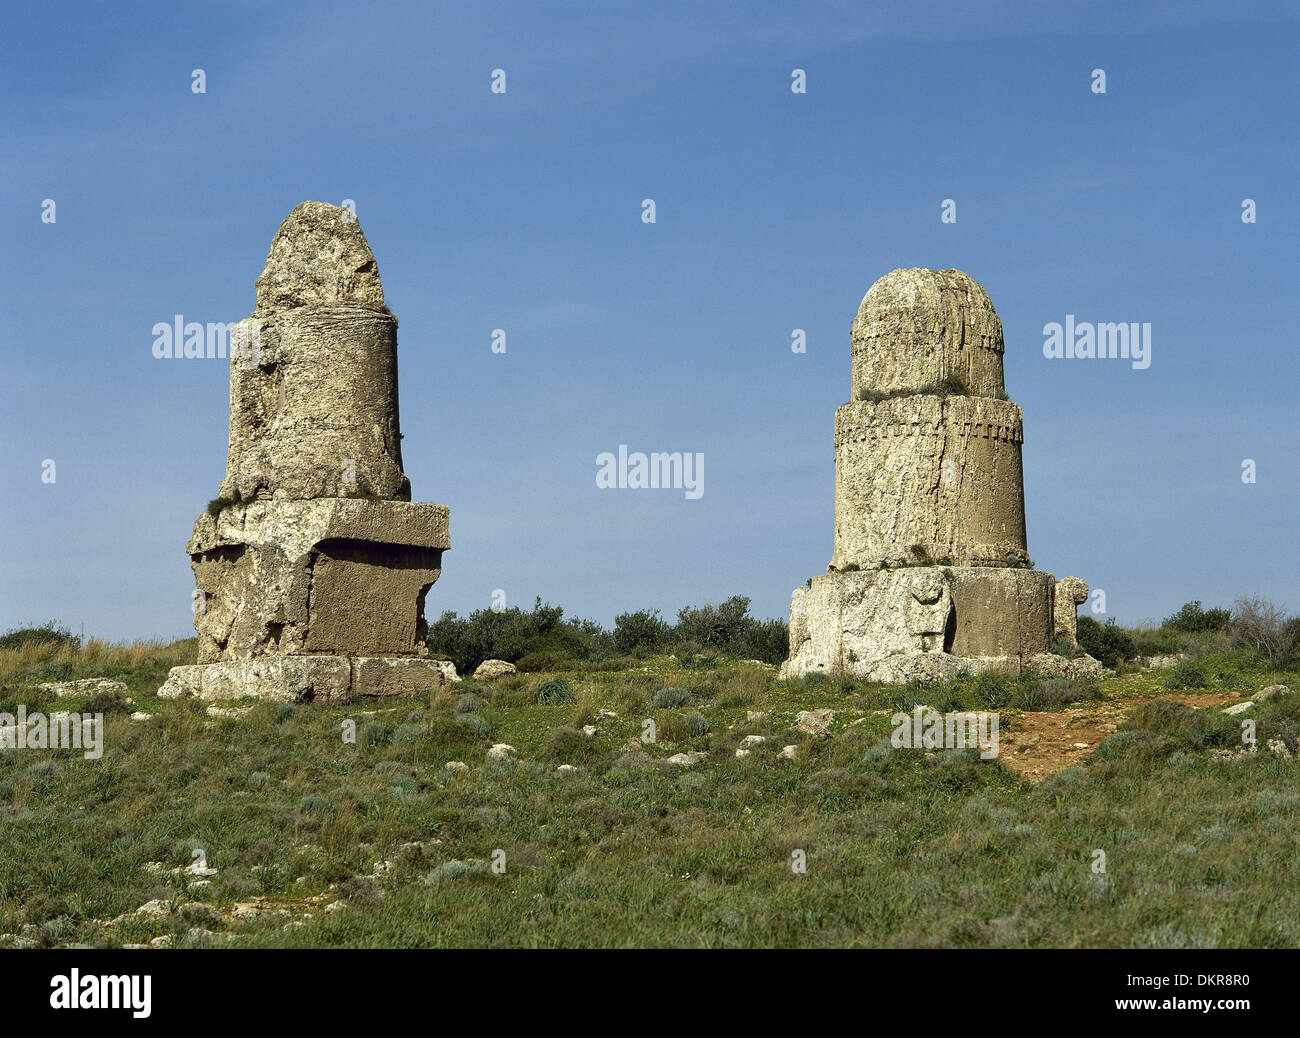 Syria. Amrit or Marathos. Ancient Phoenician city. d 'al Maghazil' or The Spindles. Stock Photo